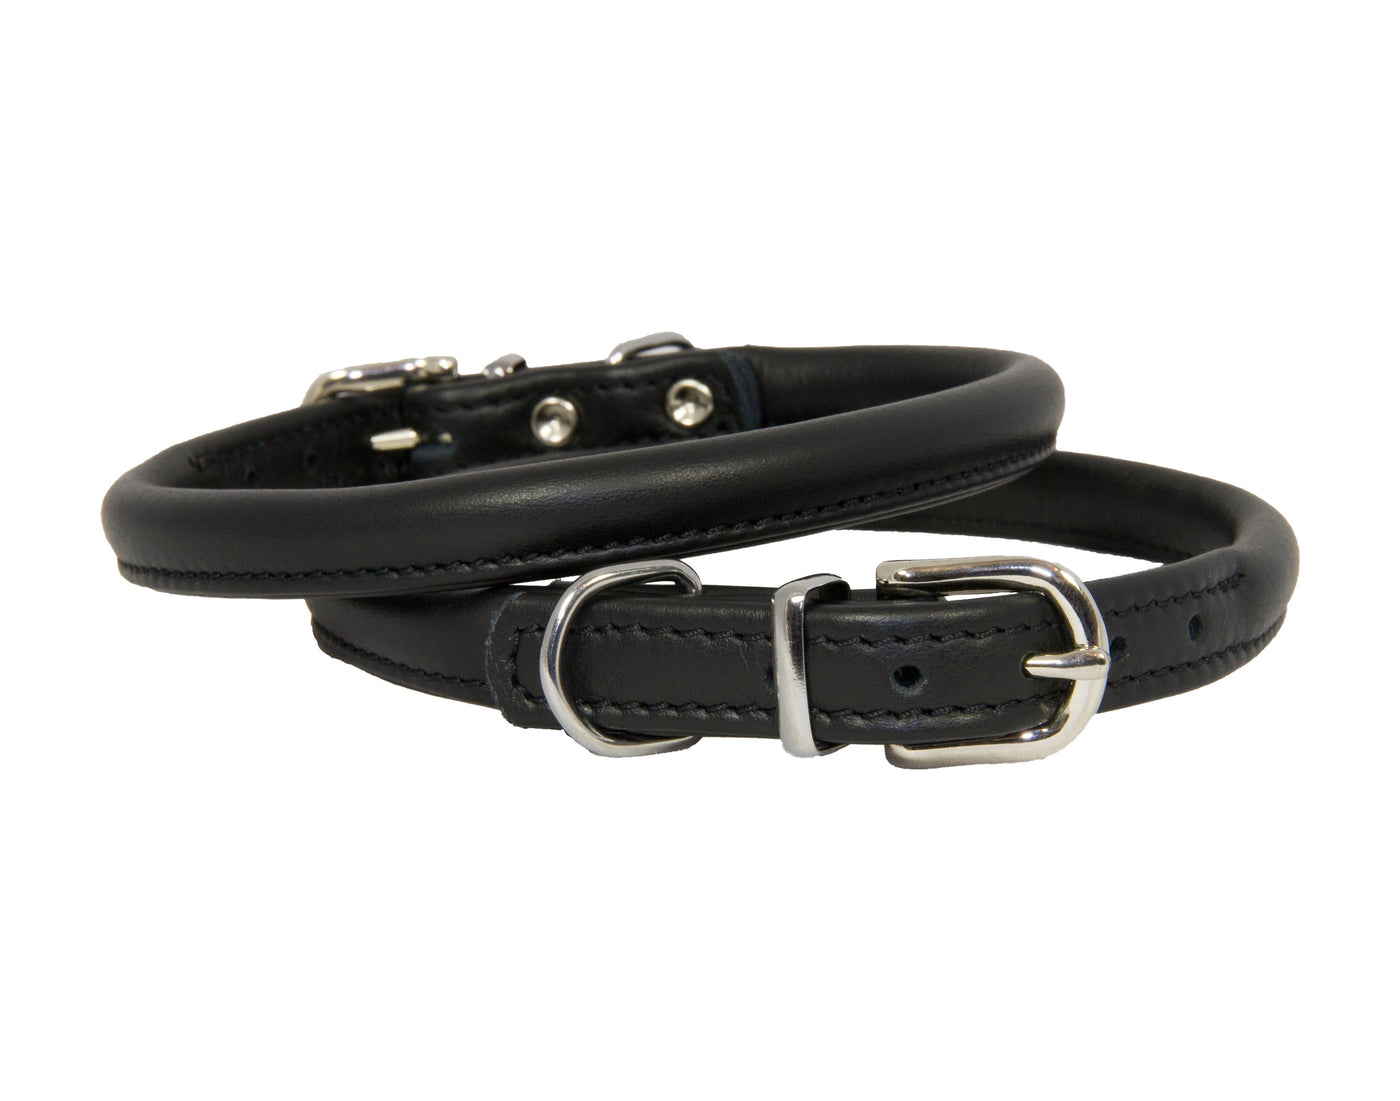 Black rolled leather dog collar